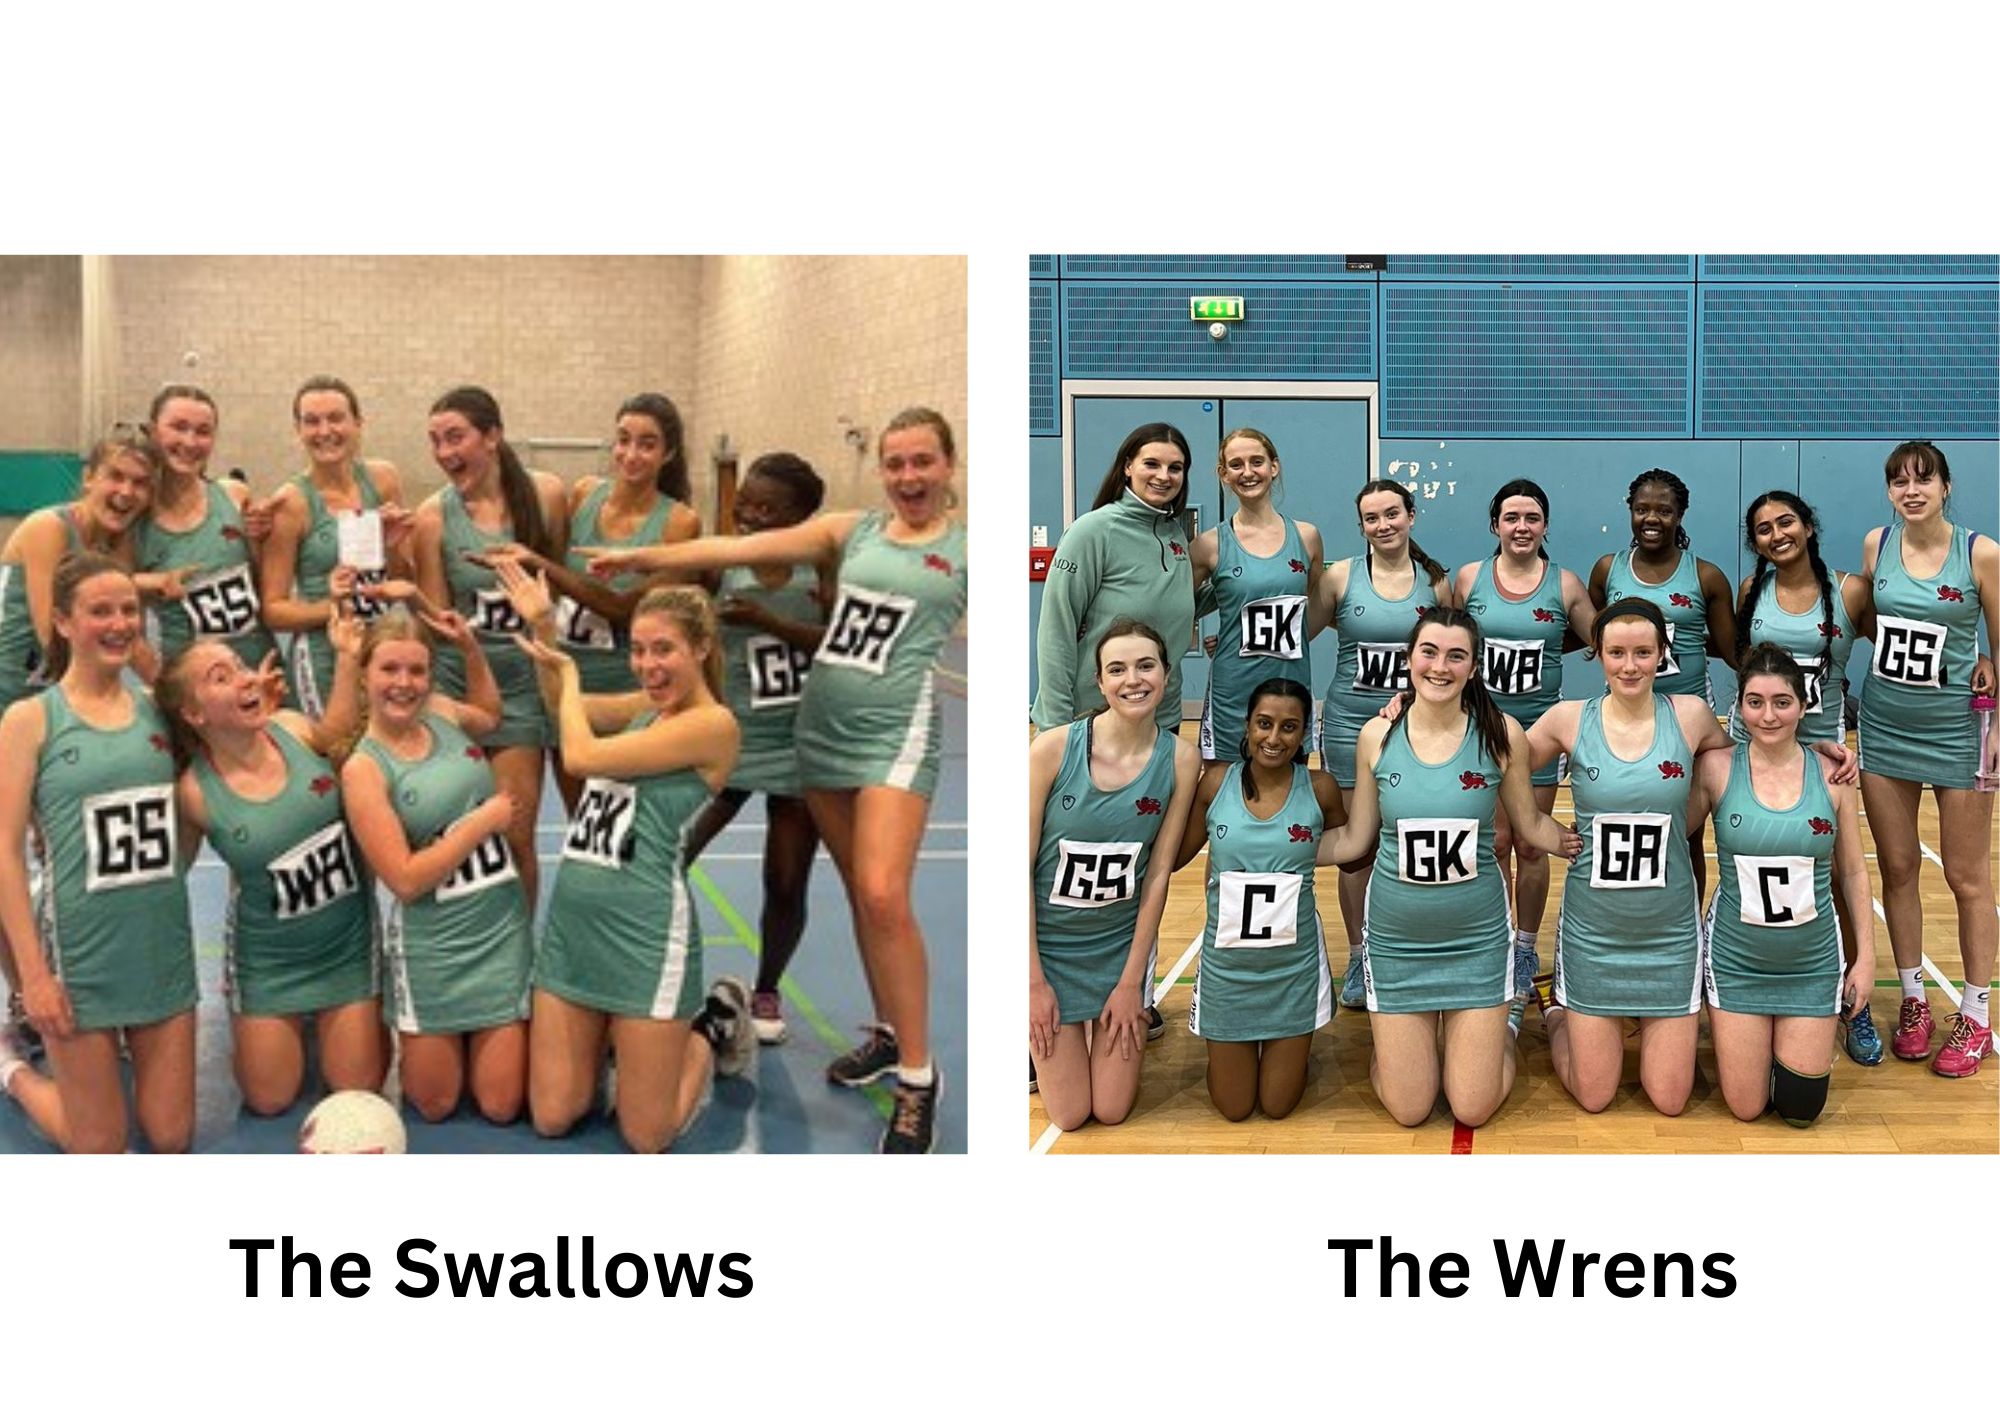 A collage of two netball teams